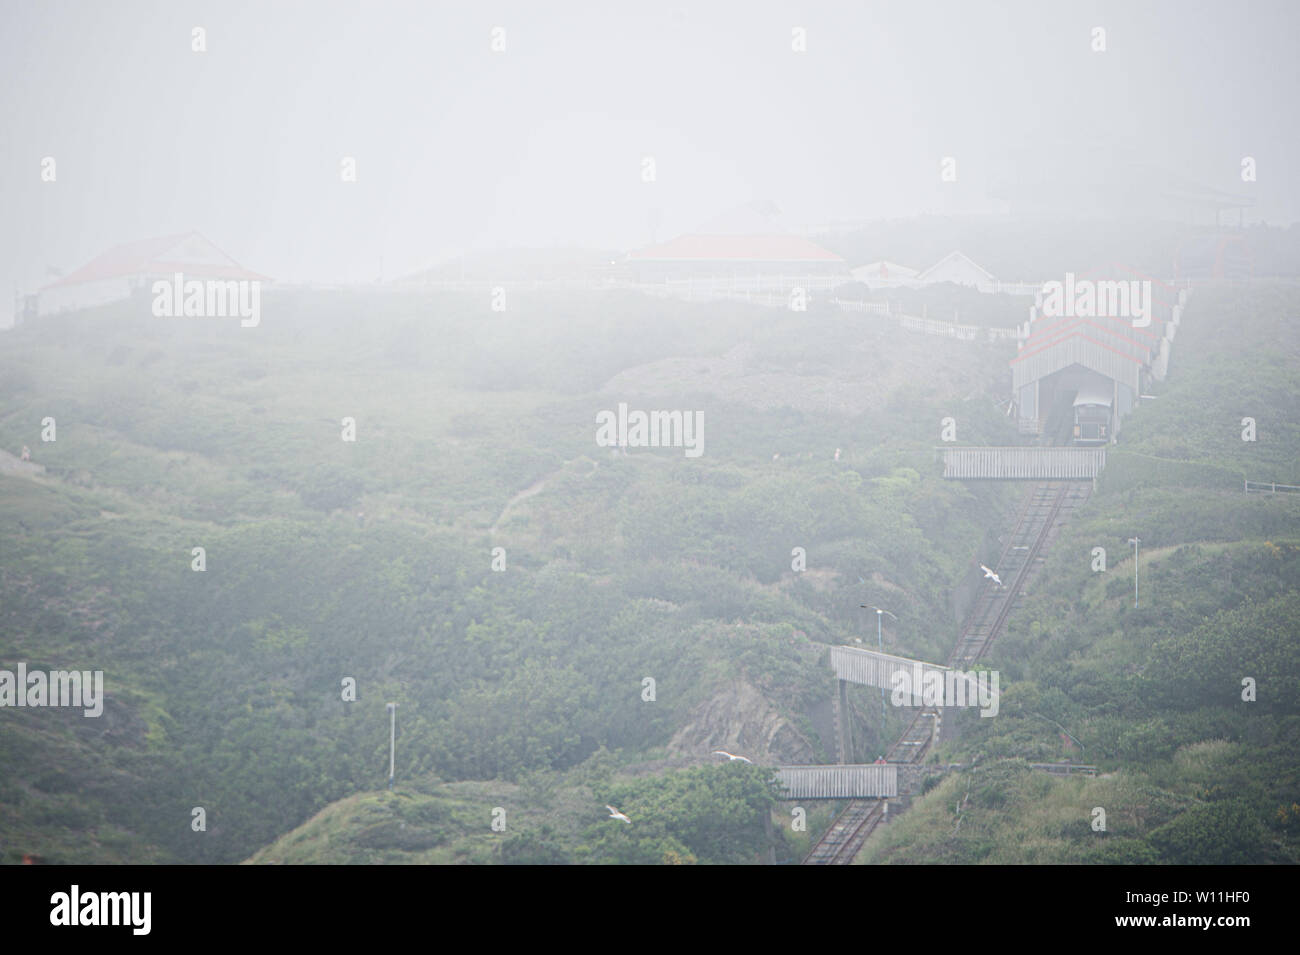 Aberystwyth, Wales, UK. Saturday 29 Jun 2019.  UK weather: As the south east of England is experiencing record breaking hot weather,  the distictive cliff railway in Aberystwyth on  the west coast of Wales is shrouded in low cloud and sea mist, keeping the temperatures substantially cooler.   Photo credit Keith Morris / Alamy Live News Stock Photo